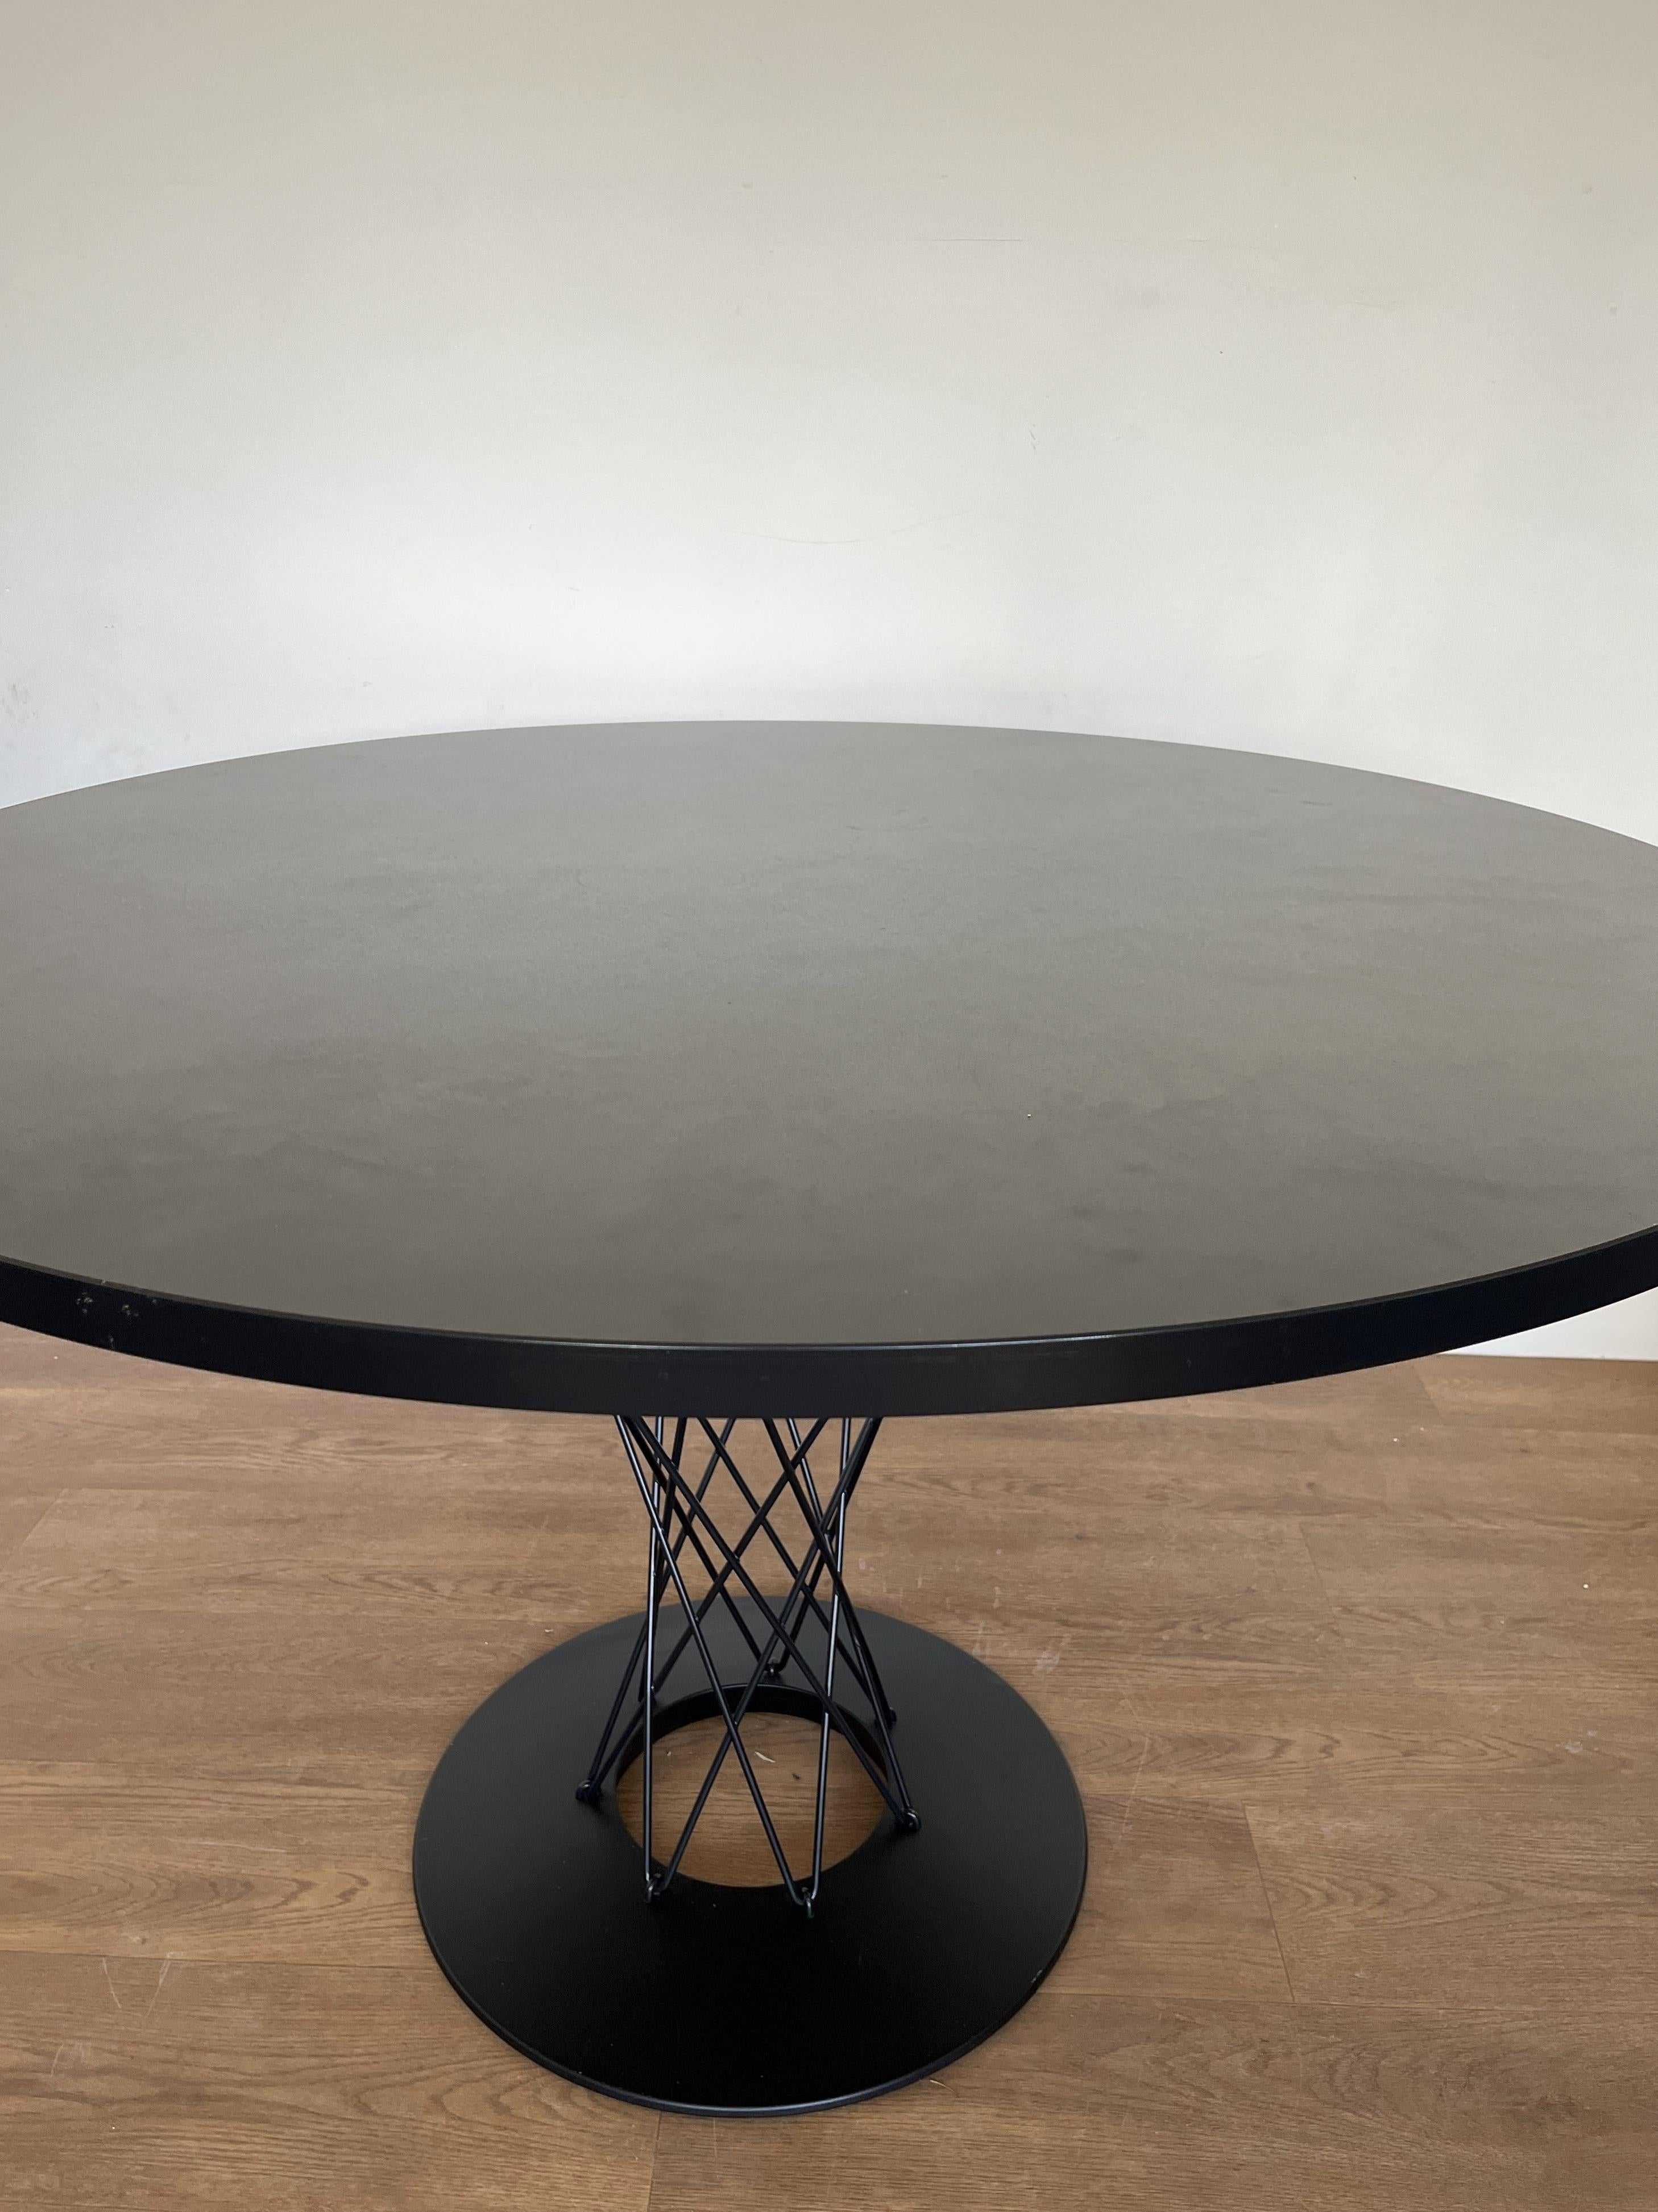 Dining table designed by Isamu Noguchi for Vitra

The table has an black laminate top with a black cast iron base and chromed steel rod supports. The 'all black;' top was a special limited edition when it was ordered by the previous owner in